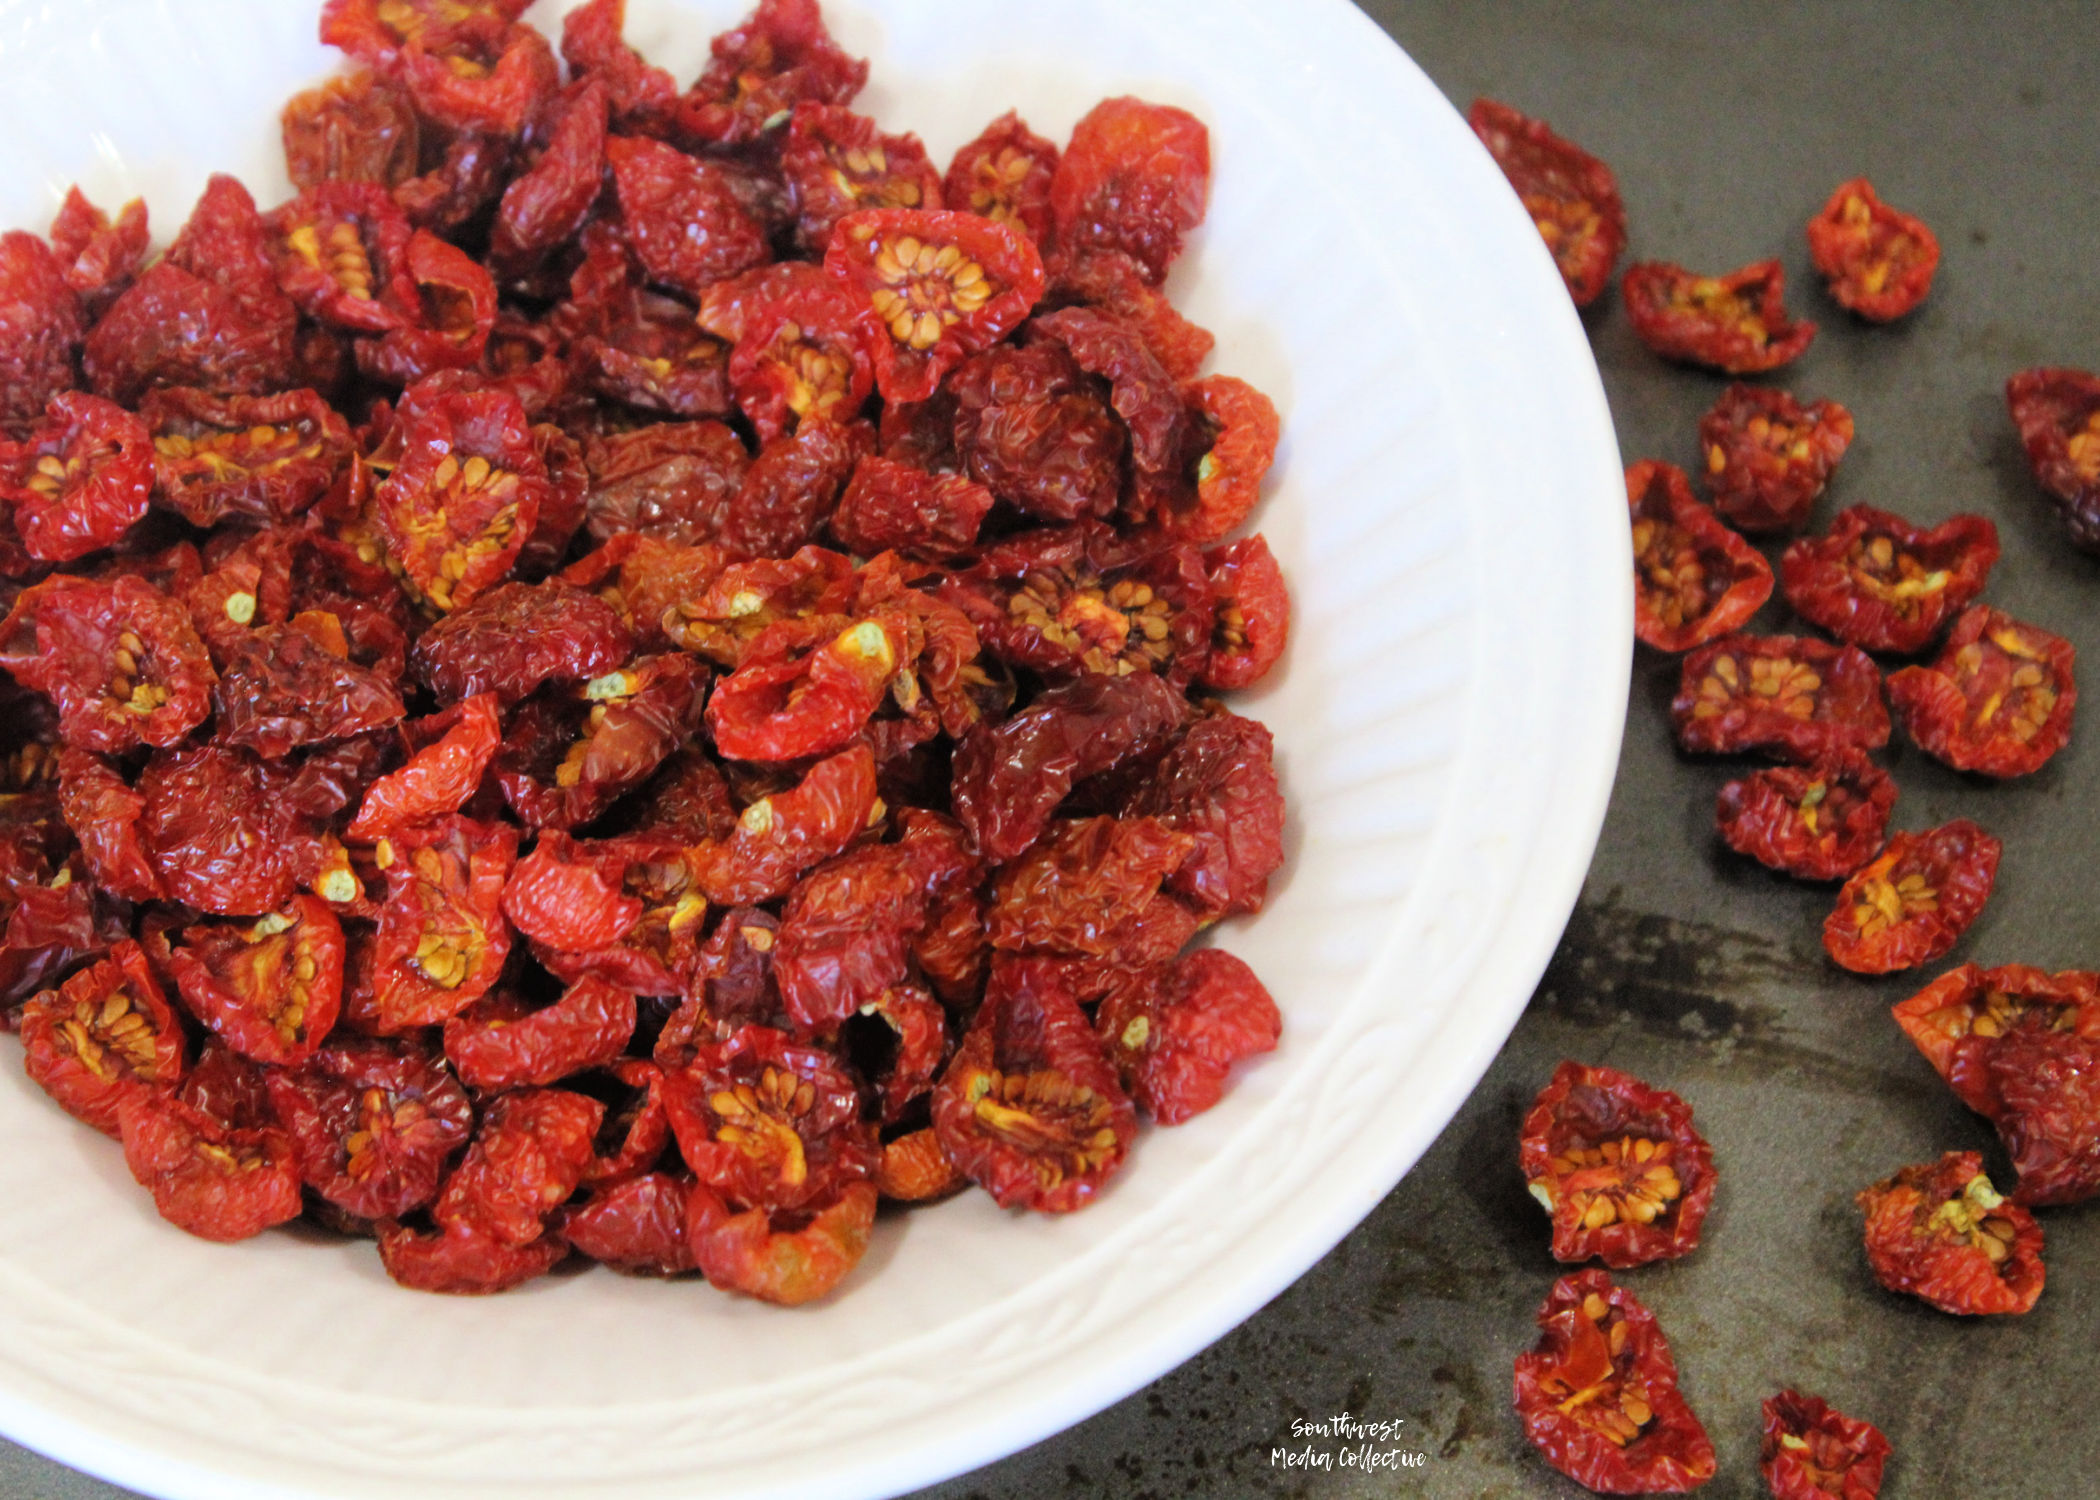 Step by step directions to help you dehydrate cherry tomatoes - the result is a tasty, burst of flavor that can be used in salads, wraps, bread and more!